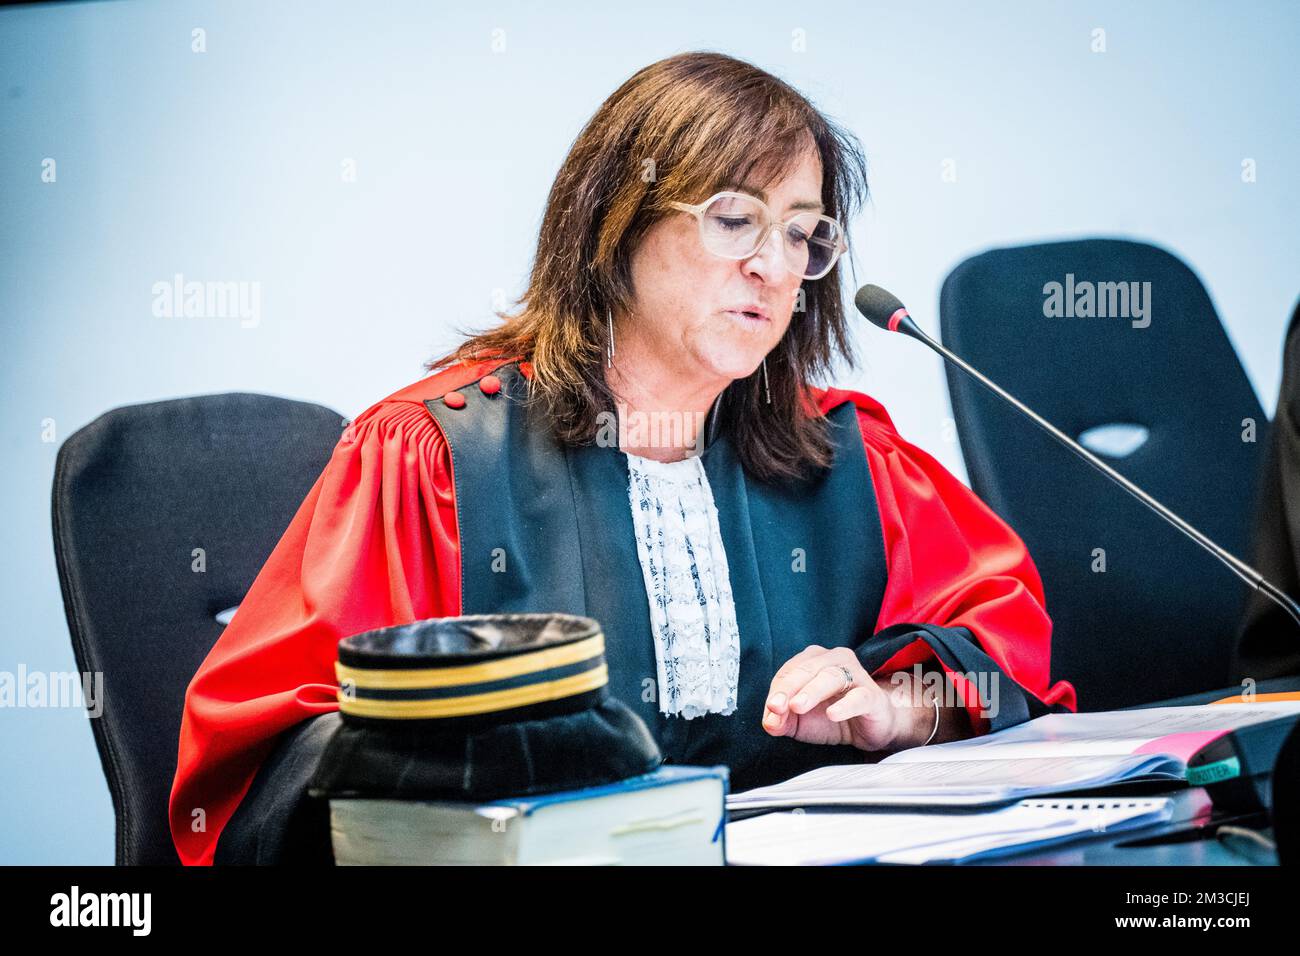 Chairwoman of the court Alexandra Van Kelst pictured during the jury constitution session at the assizes trial of Selahaddin Tankisi before the Assizes Court of Antwerp Province in Antwerp, Tuesday 20 September 2022. Tankisi is accused of the murder of tailor Mehmet Ozkaraman, who was found bleeding in front of his tailor shop on the Brederodestraat in Antwerp on November 6, 2019. BELGA PHOTO JASPER JACOBS  Stock Photo